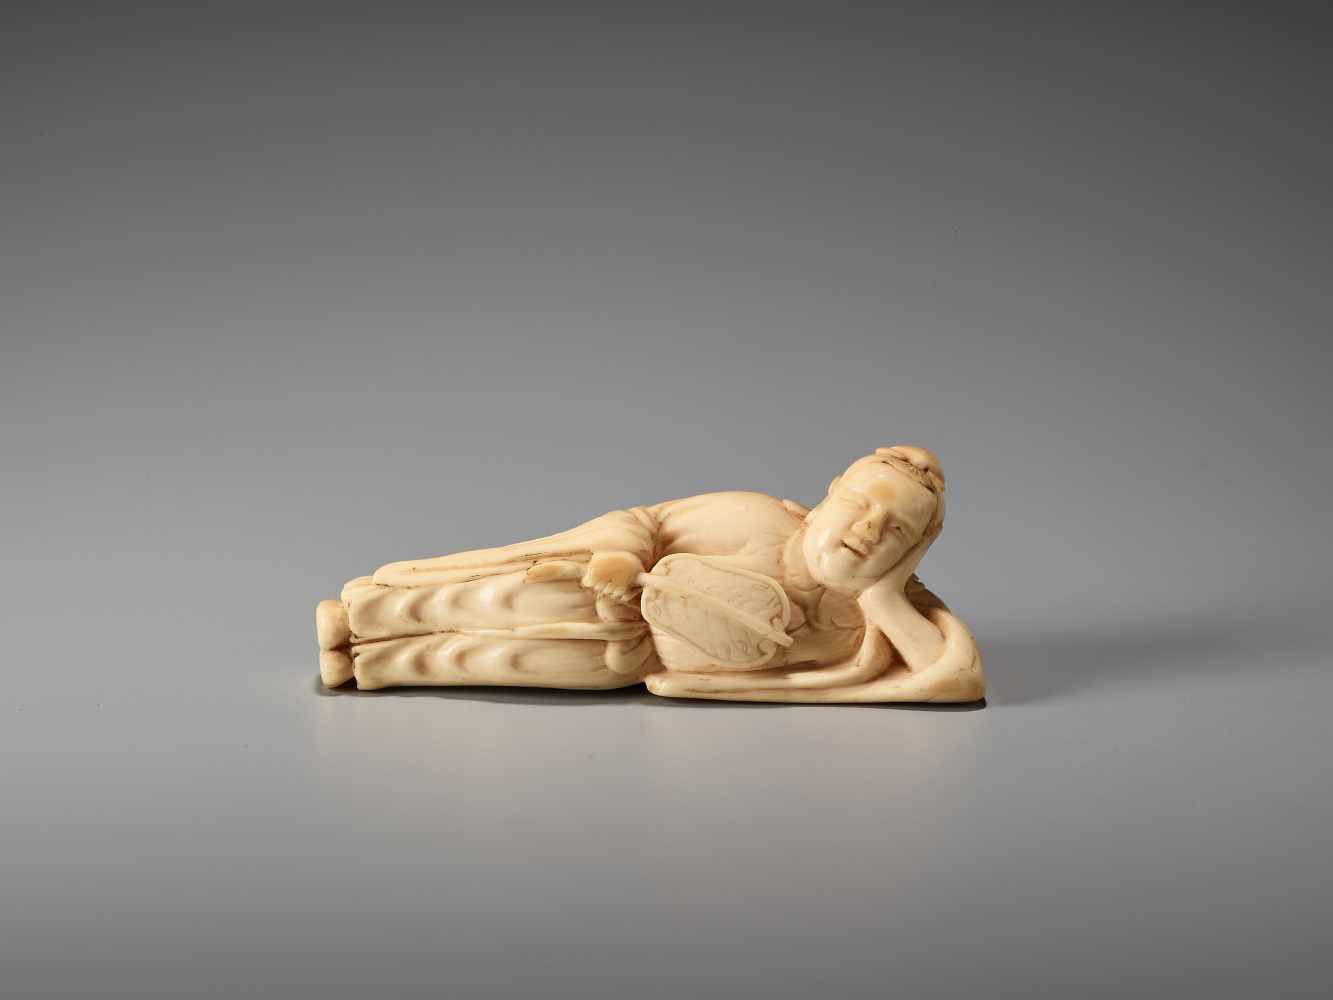 AN IVORY NETSUKE OF A RECLINING CHINESE IMMORTAL WITH A FANUnsigned, ivory netsukeJapan, late 18th - Image 3 of 6